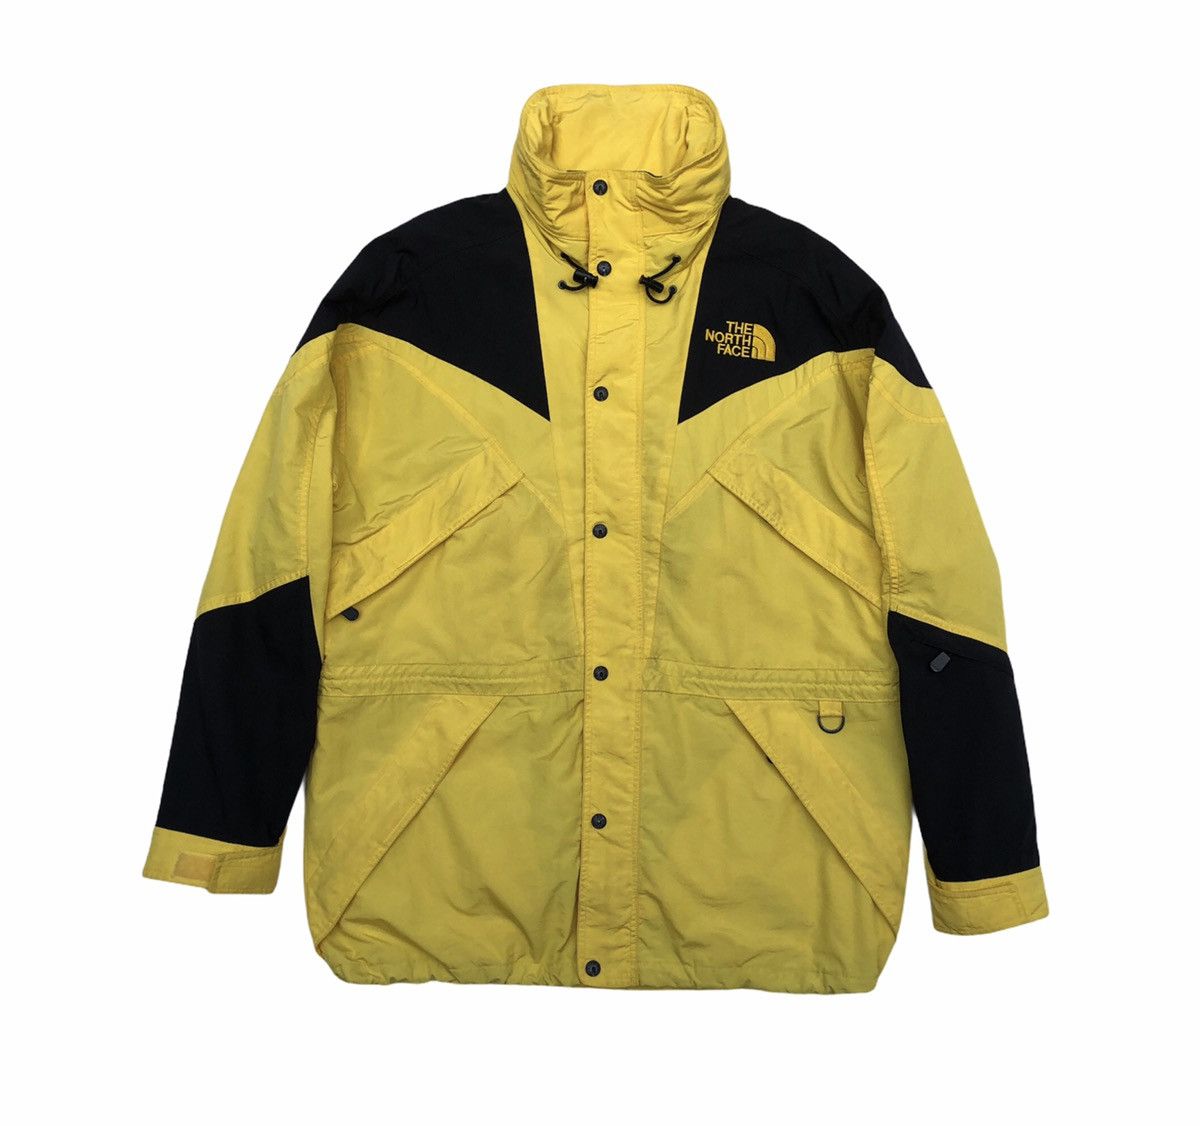 The North Face 🔥The North Face Zip Button Up Man Hooded Jacket | Grailed